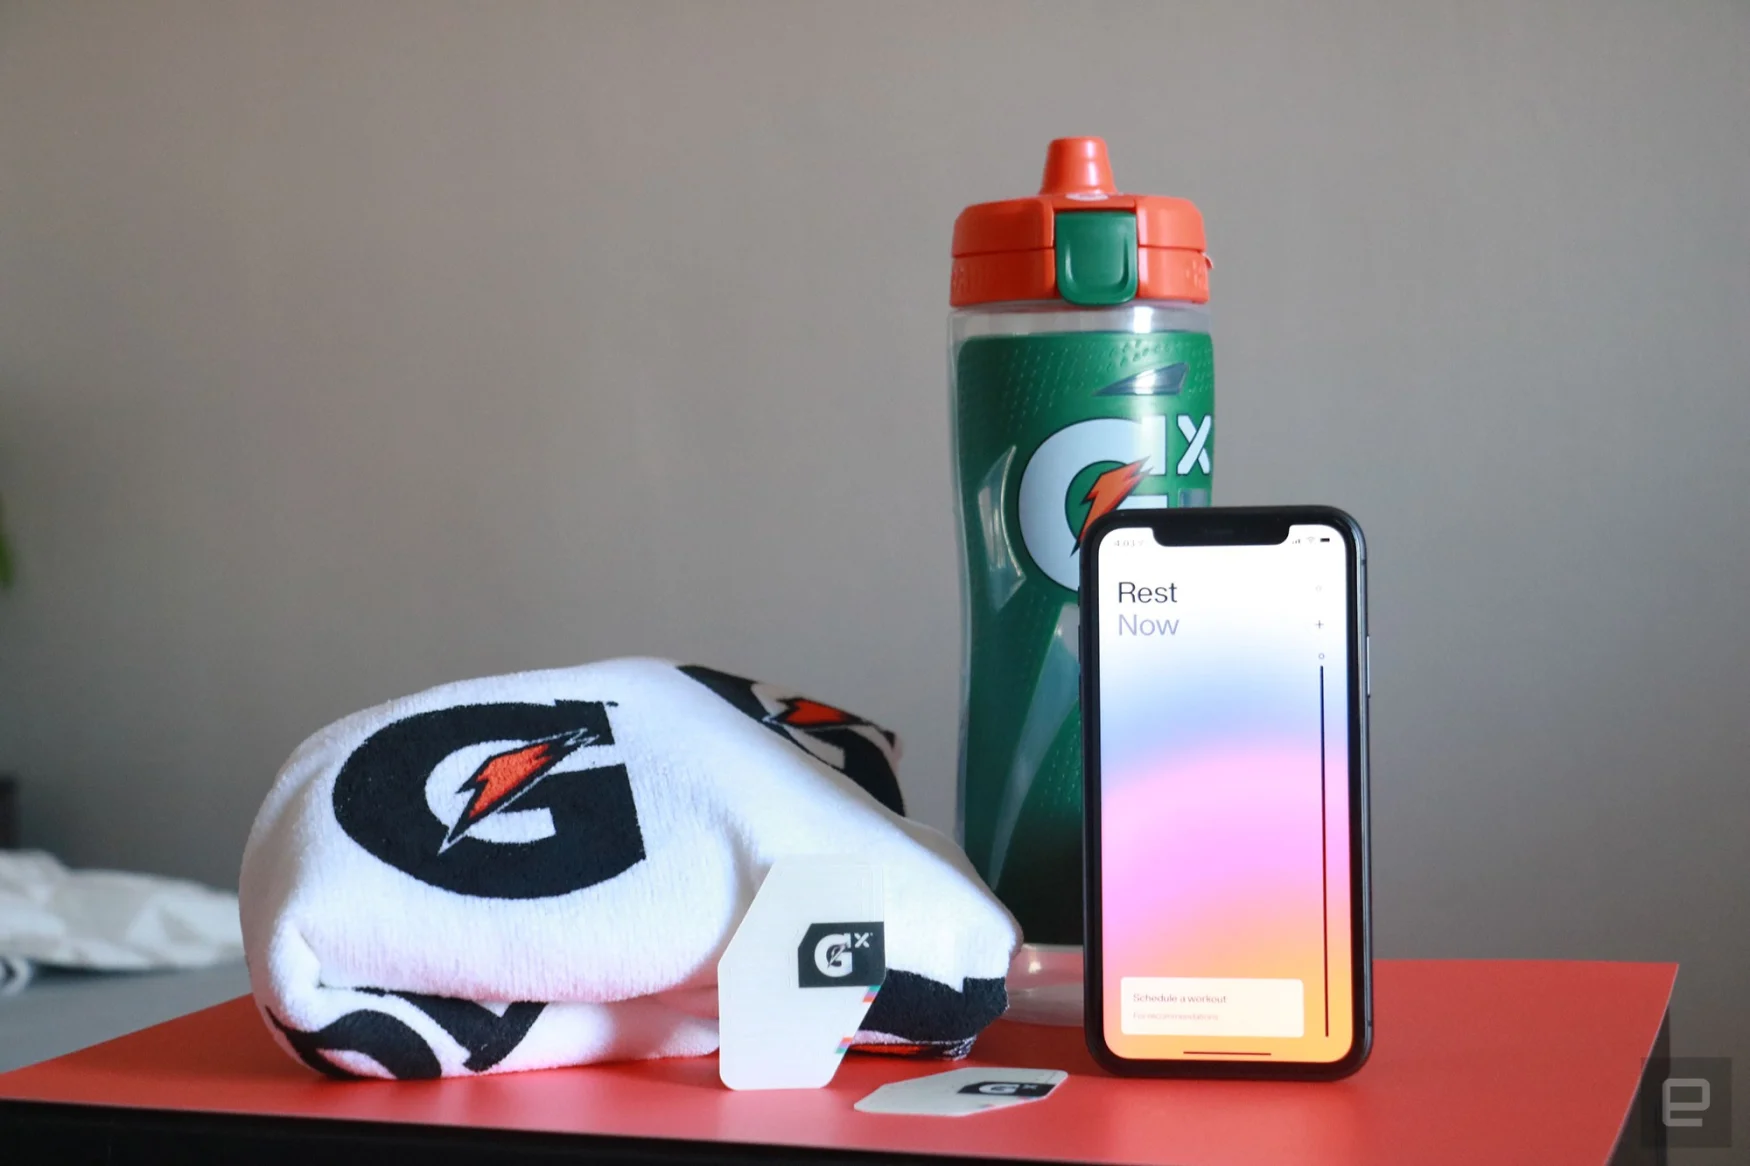 Gatorade Gx Sweat patch on a desk with Gatorade towel, bottle and an iPhone in the background